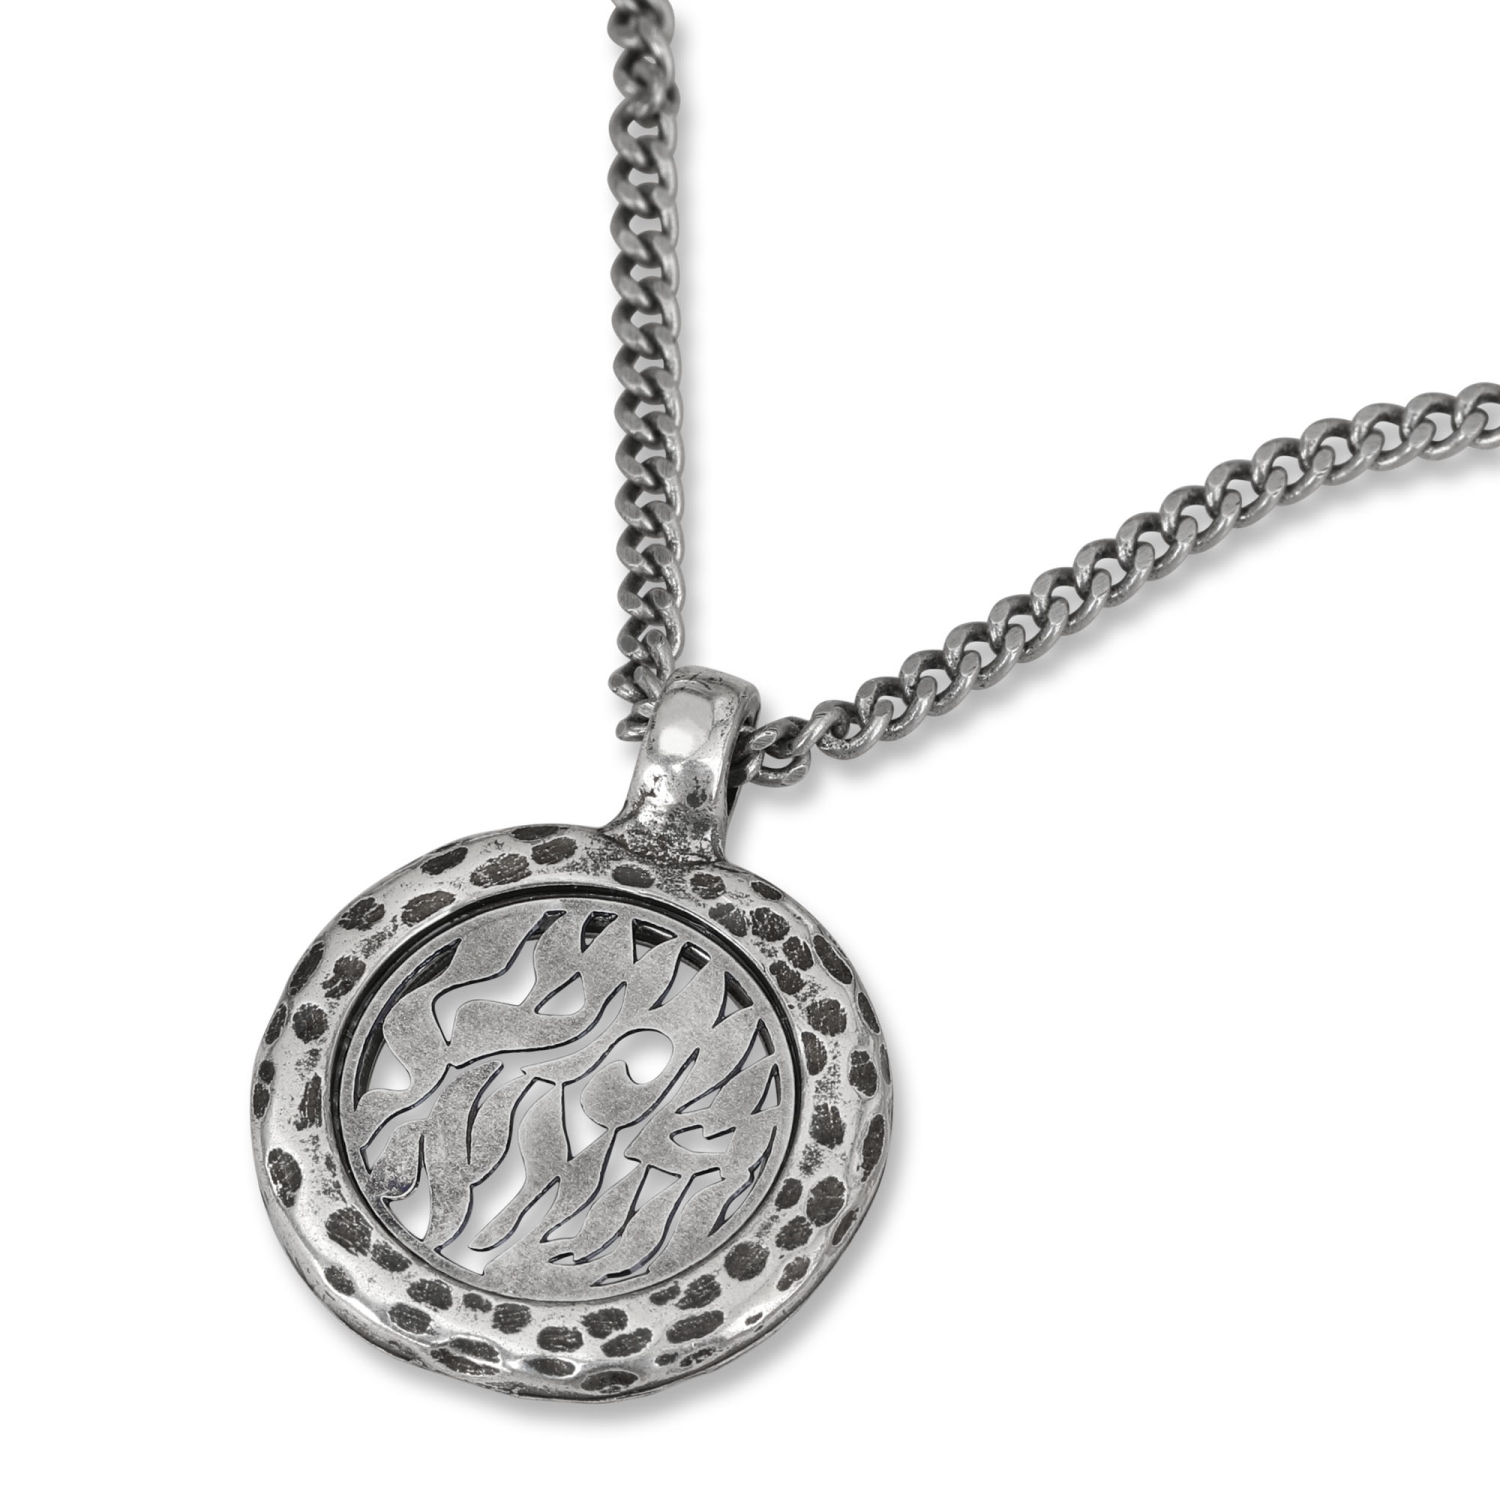 Galis Jewelry Blackened Silver Plated Shema Yisrael Disk Men's Necklace - 2